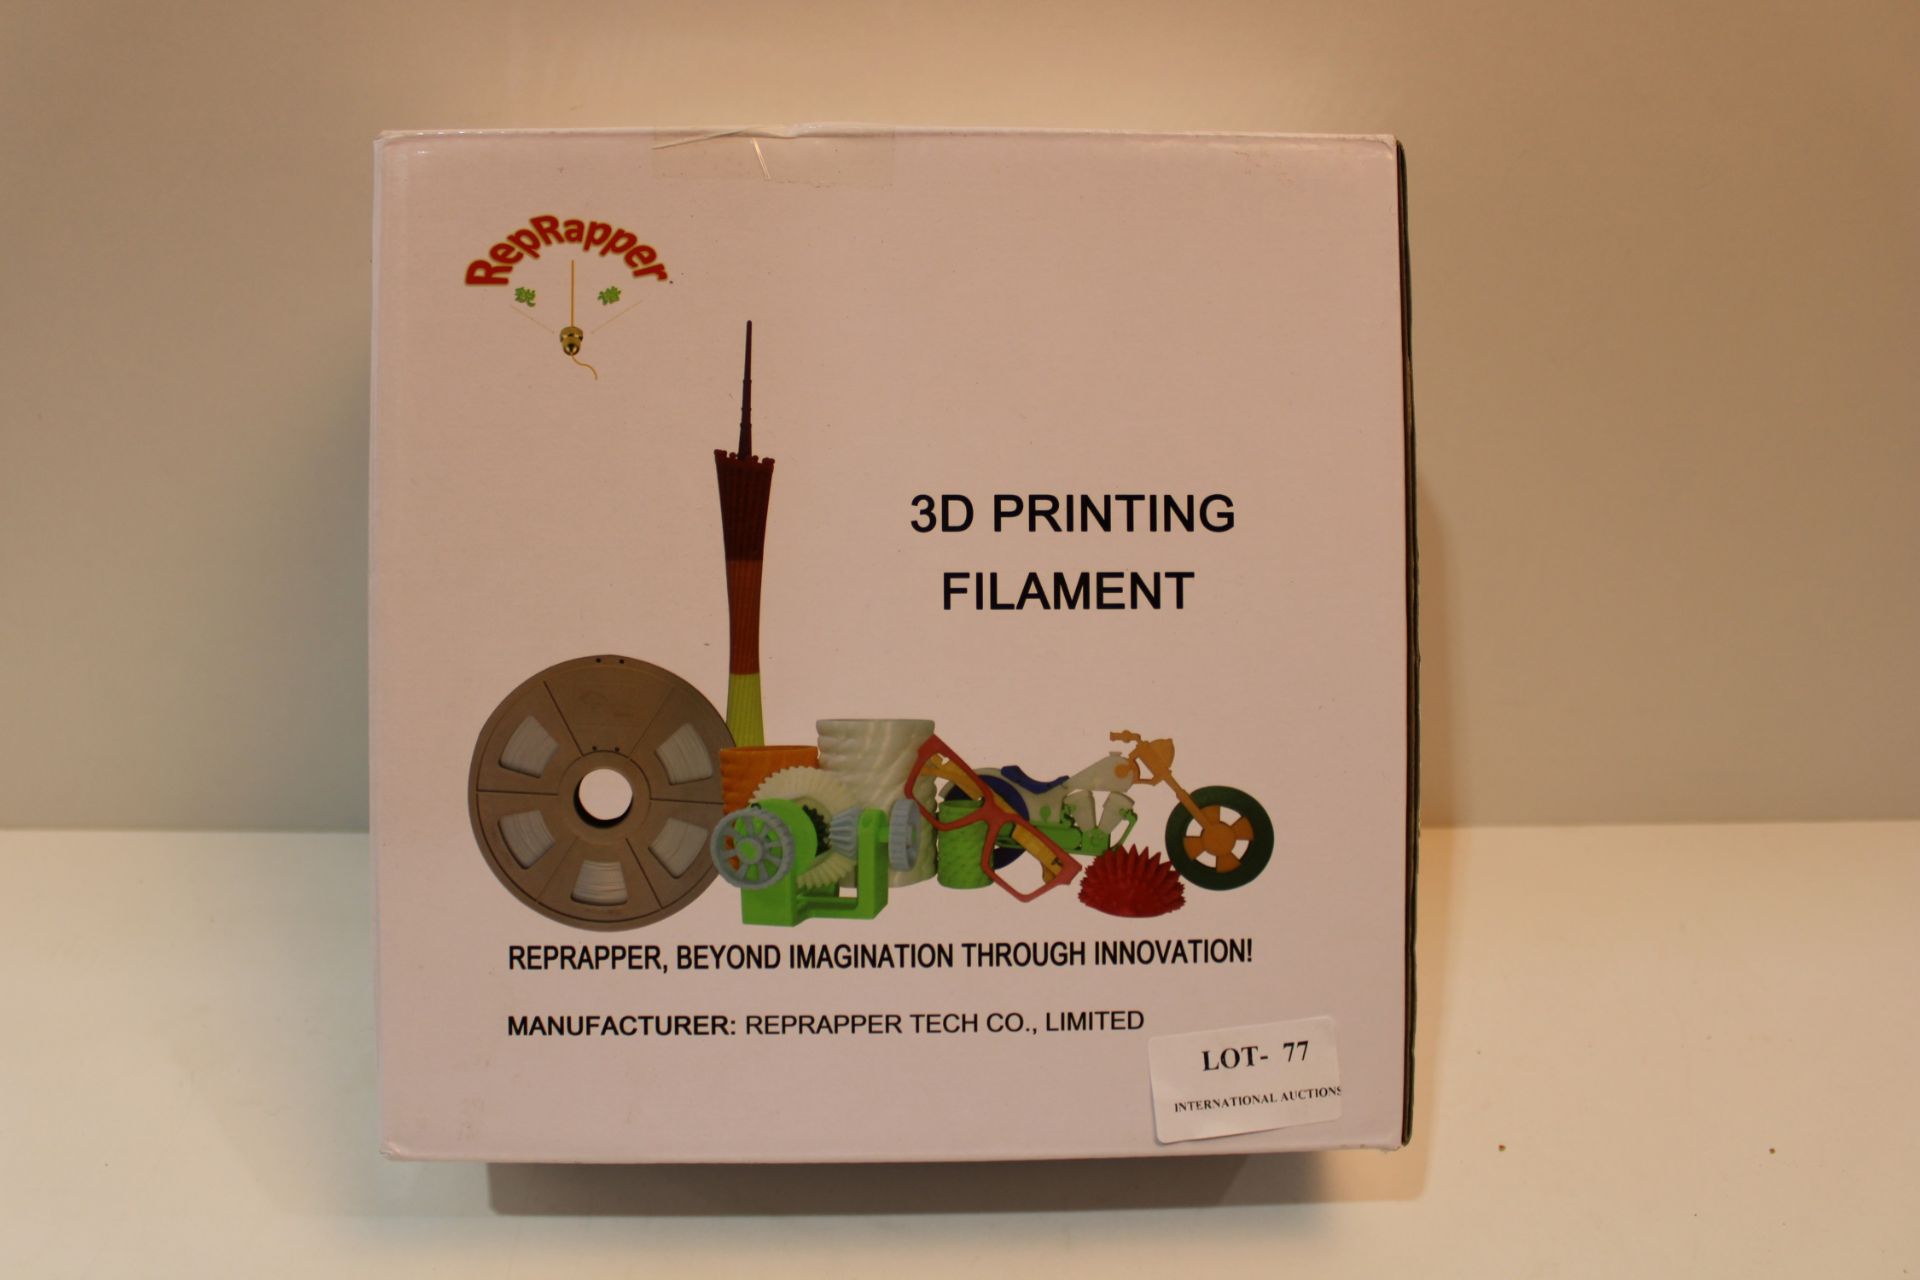 REPRAPPER 3D PRINTING FILAMENT RRP £15.99Condition ReportAppraisal Available on Request- All Items